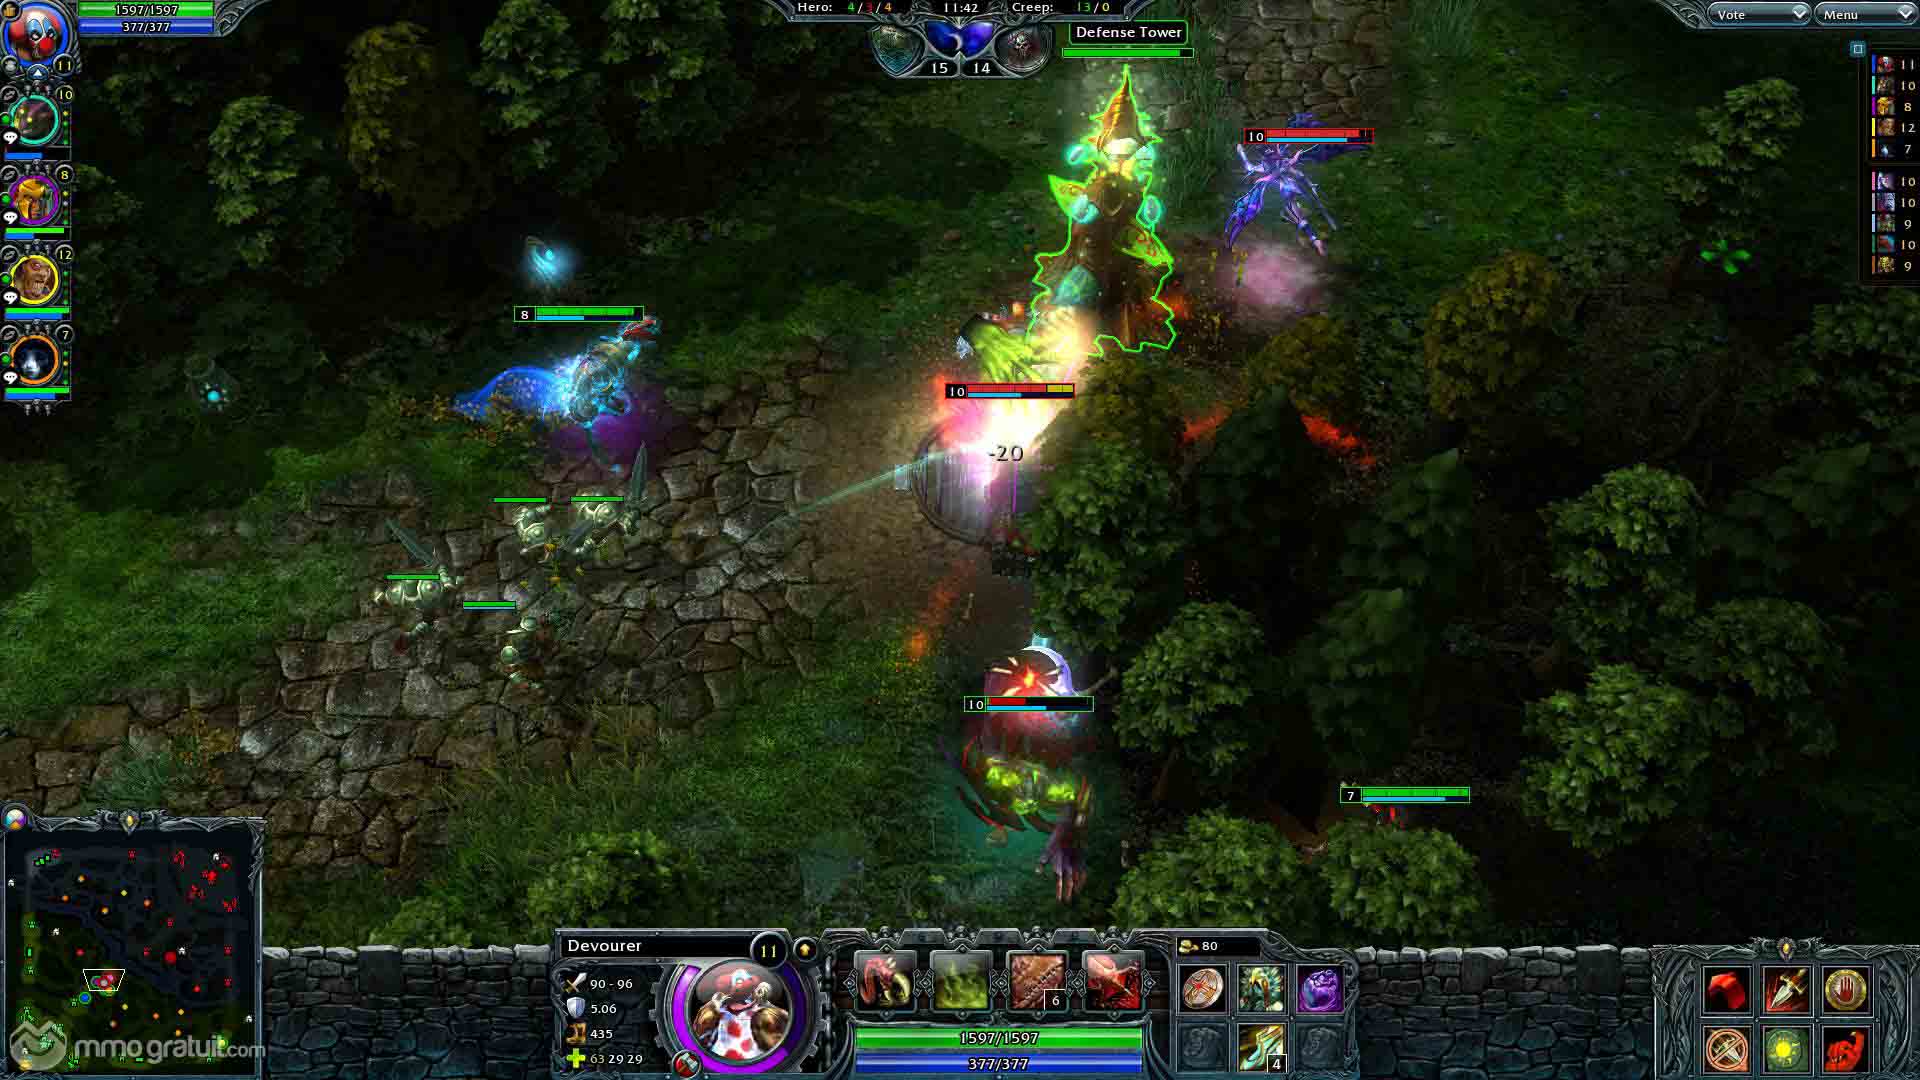 Heroes of newerth wallpapers video game hq heroes of newerth pictures k wallpapers